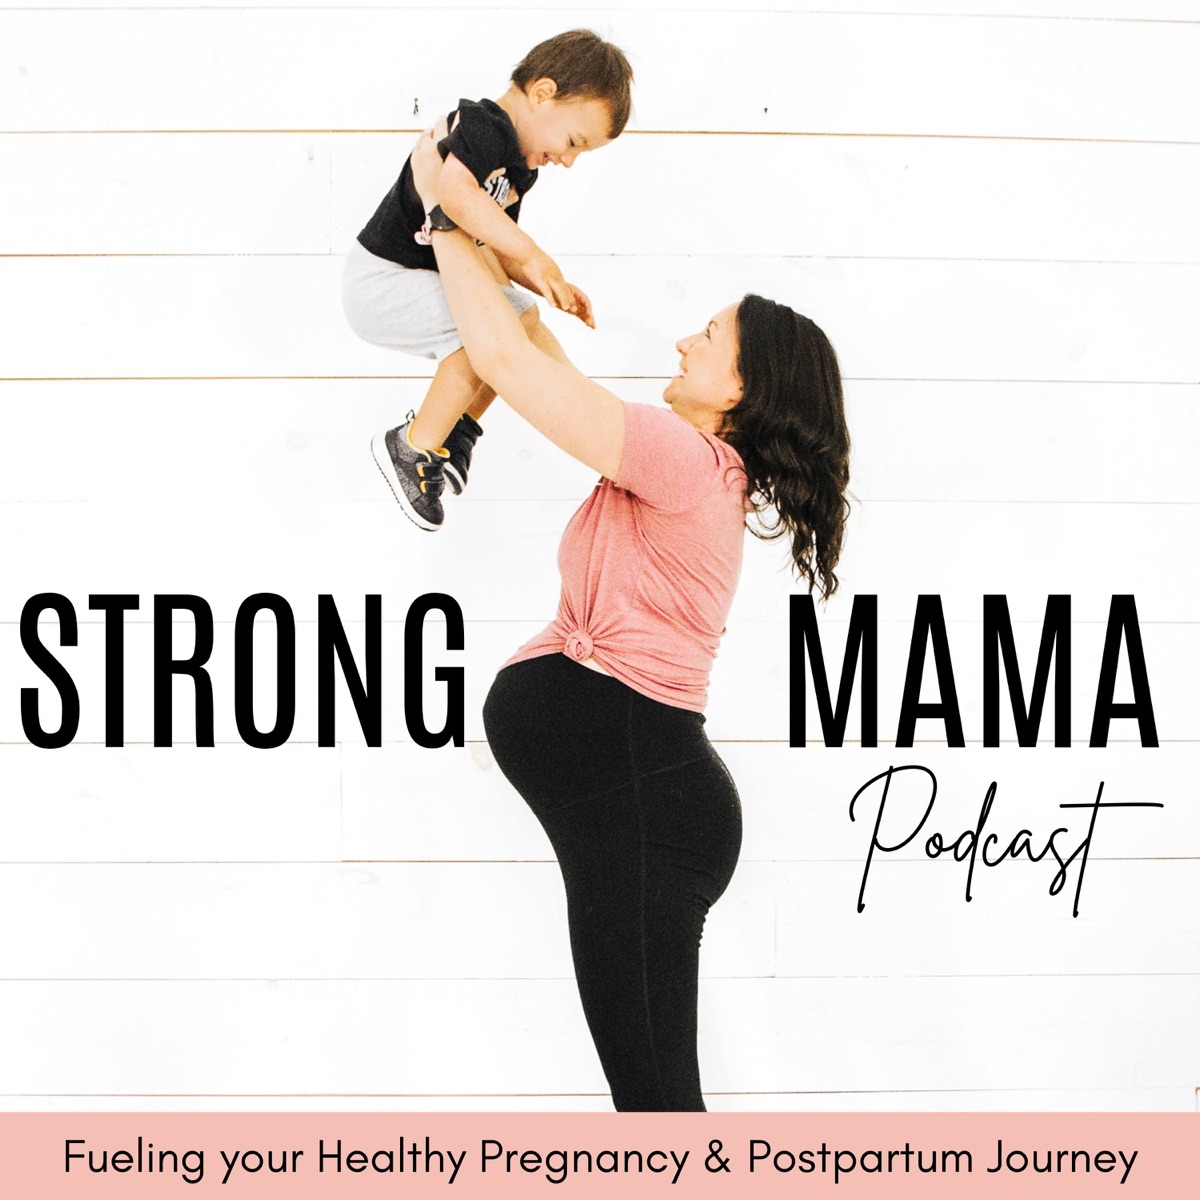 Ask Our Expert: Helping Moms with Postpartum Depression - NYC Health +  Hospitals